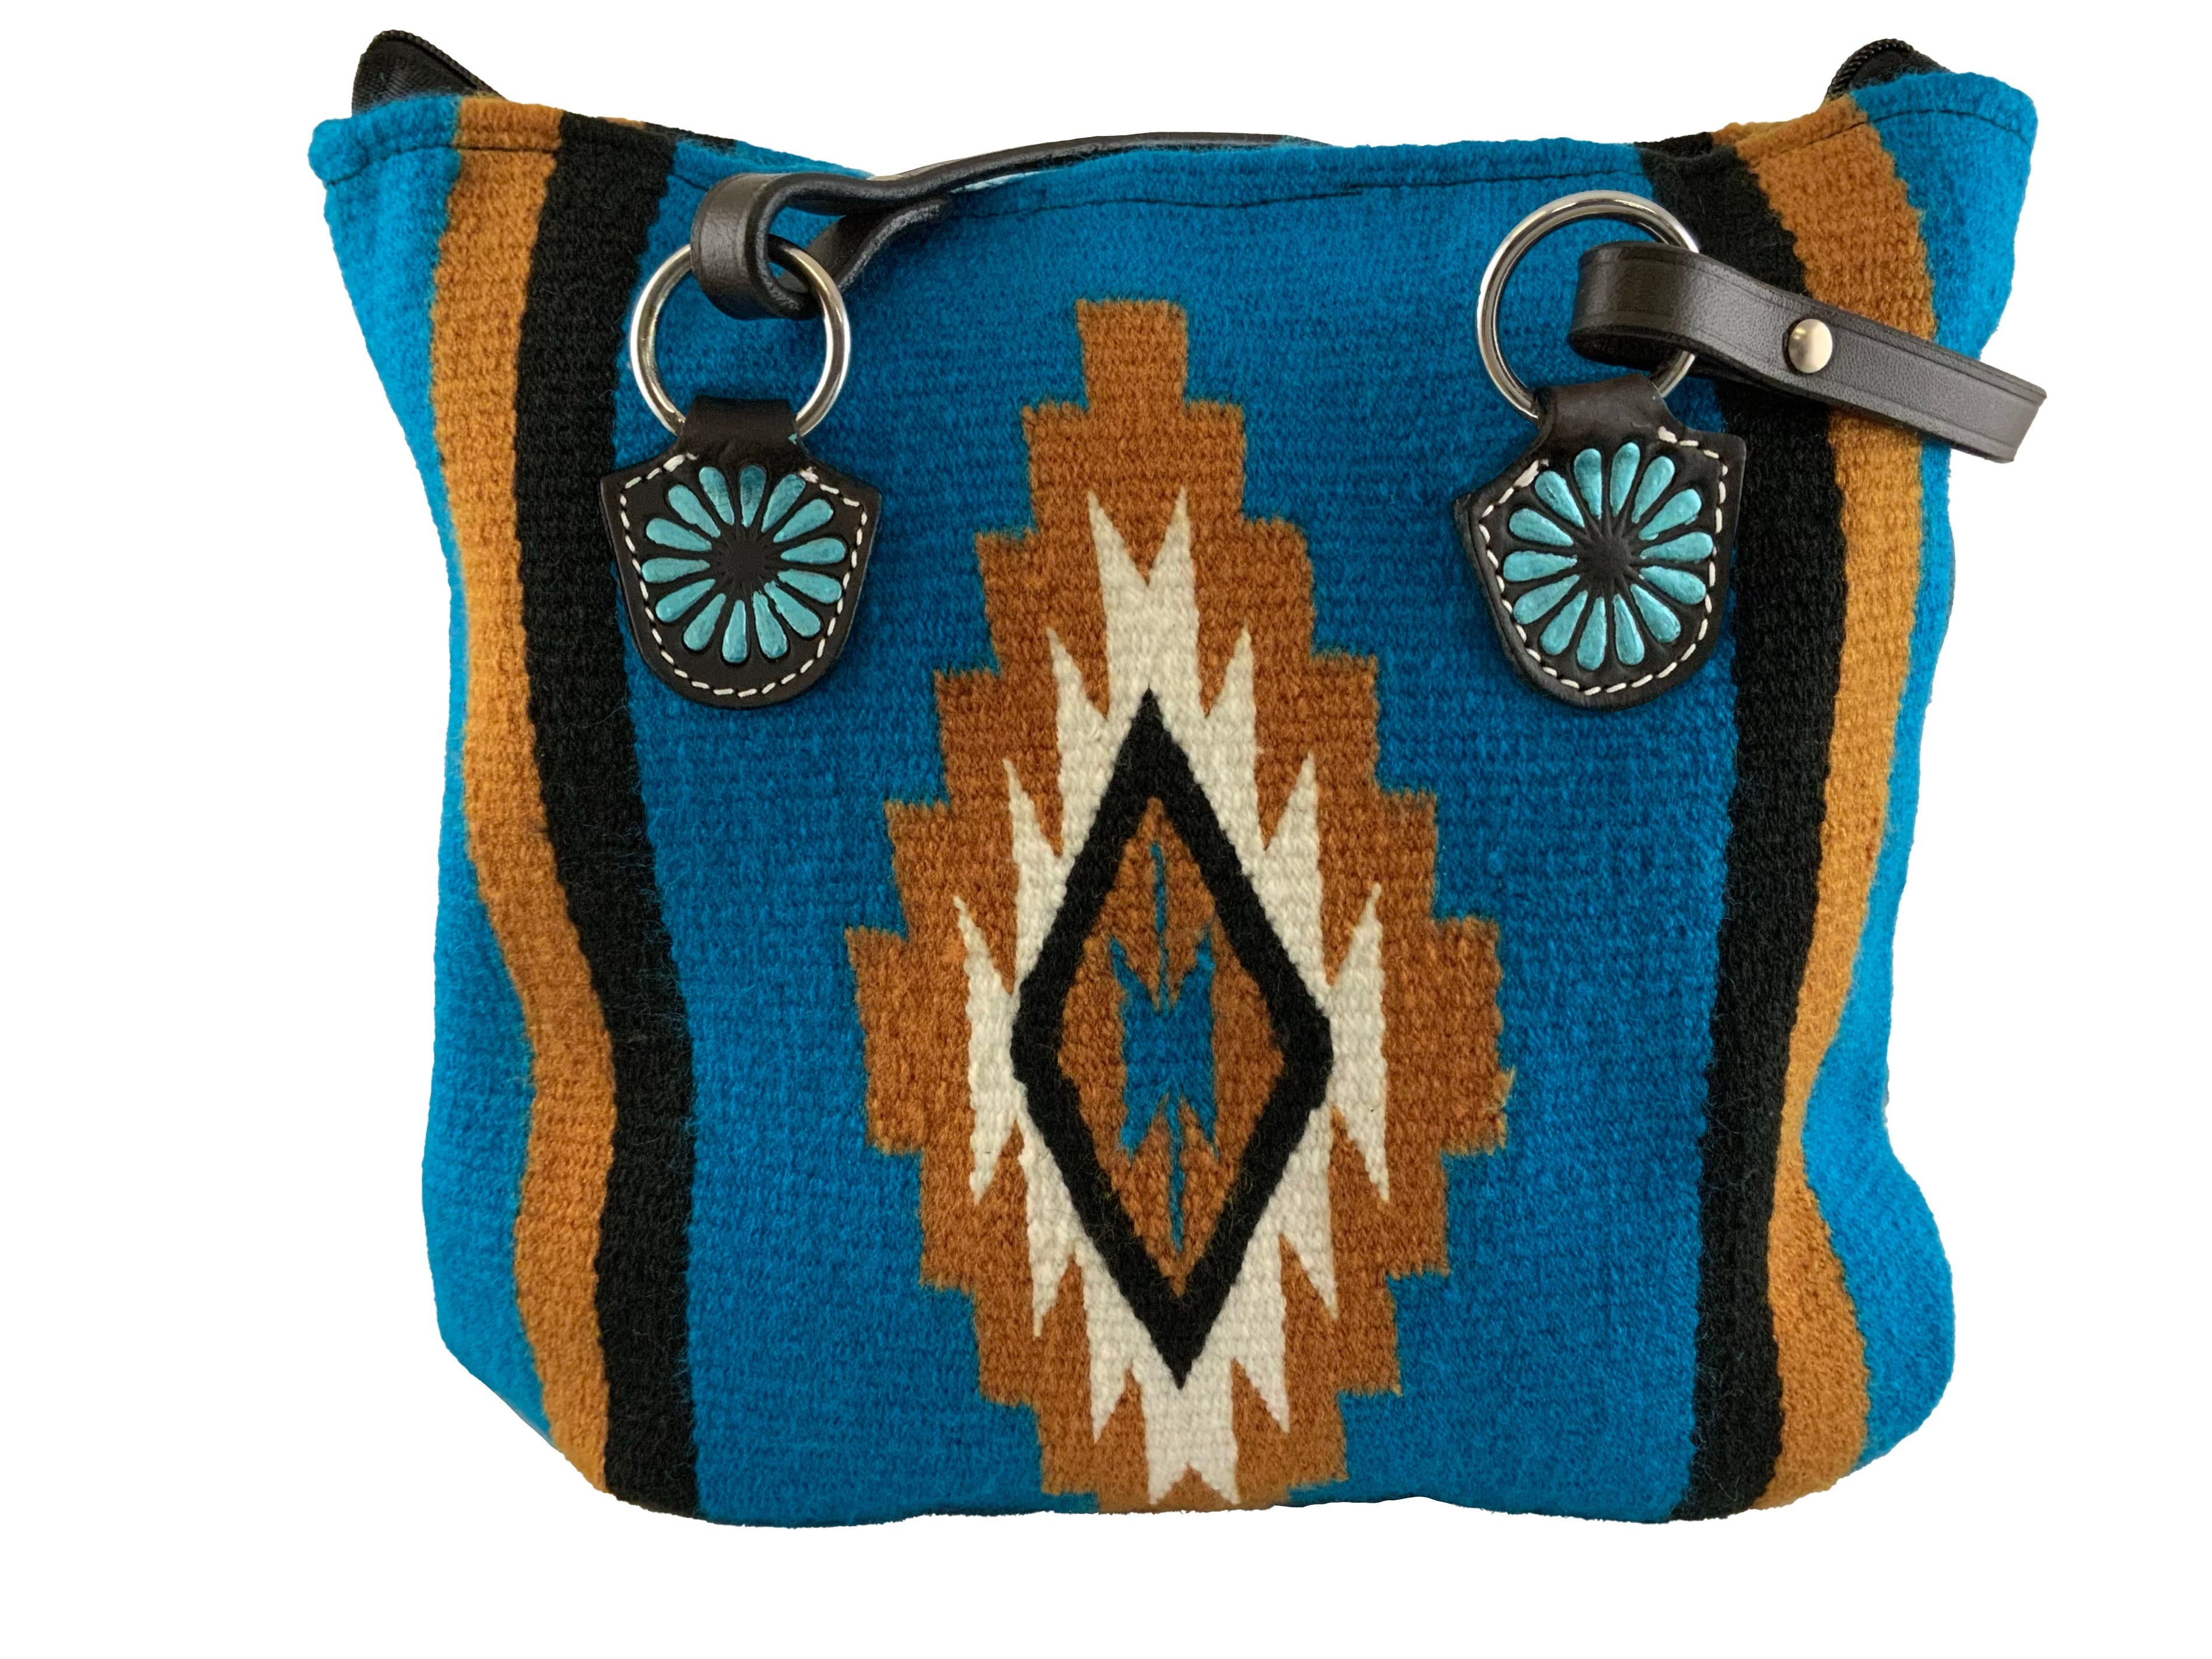 202619: Showman ® Southwest Saddle blanket handbag with genuine leather handle with painted concho Primary Showman   